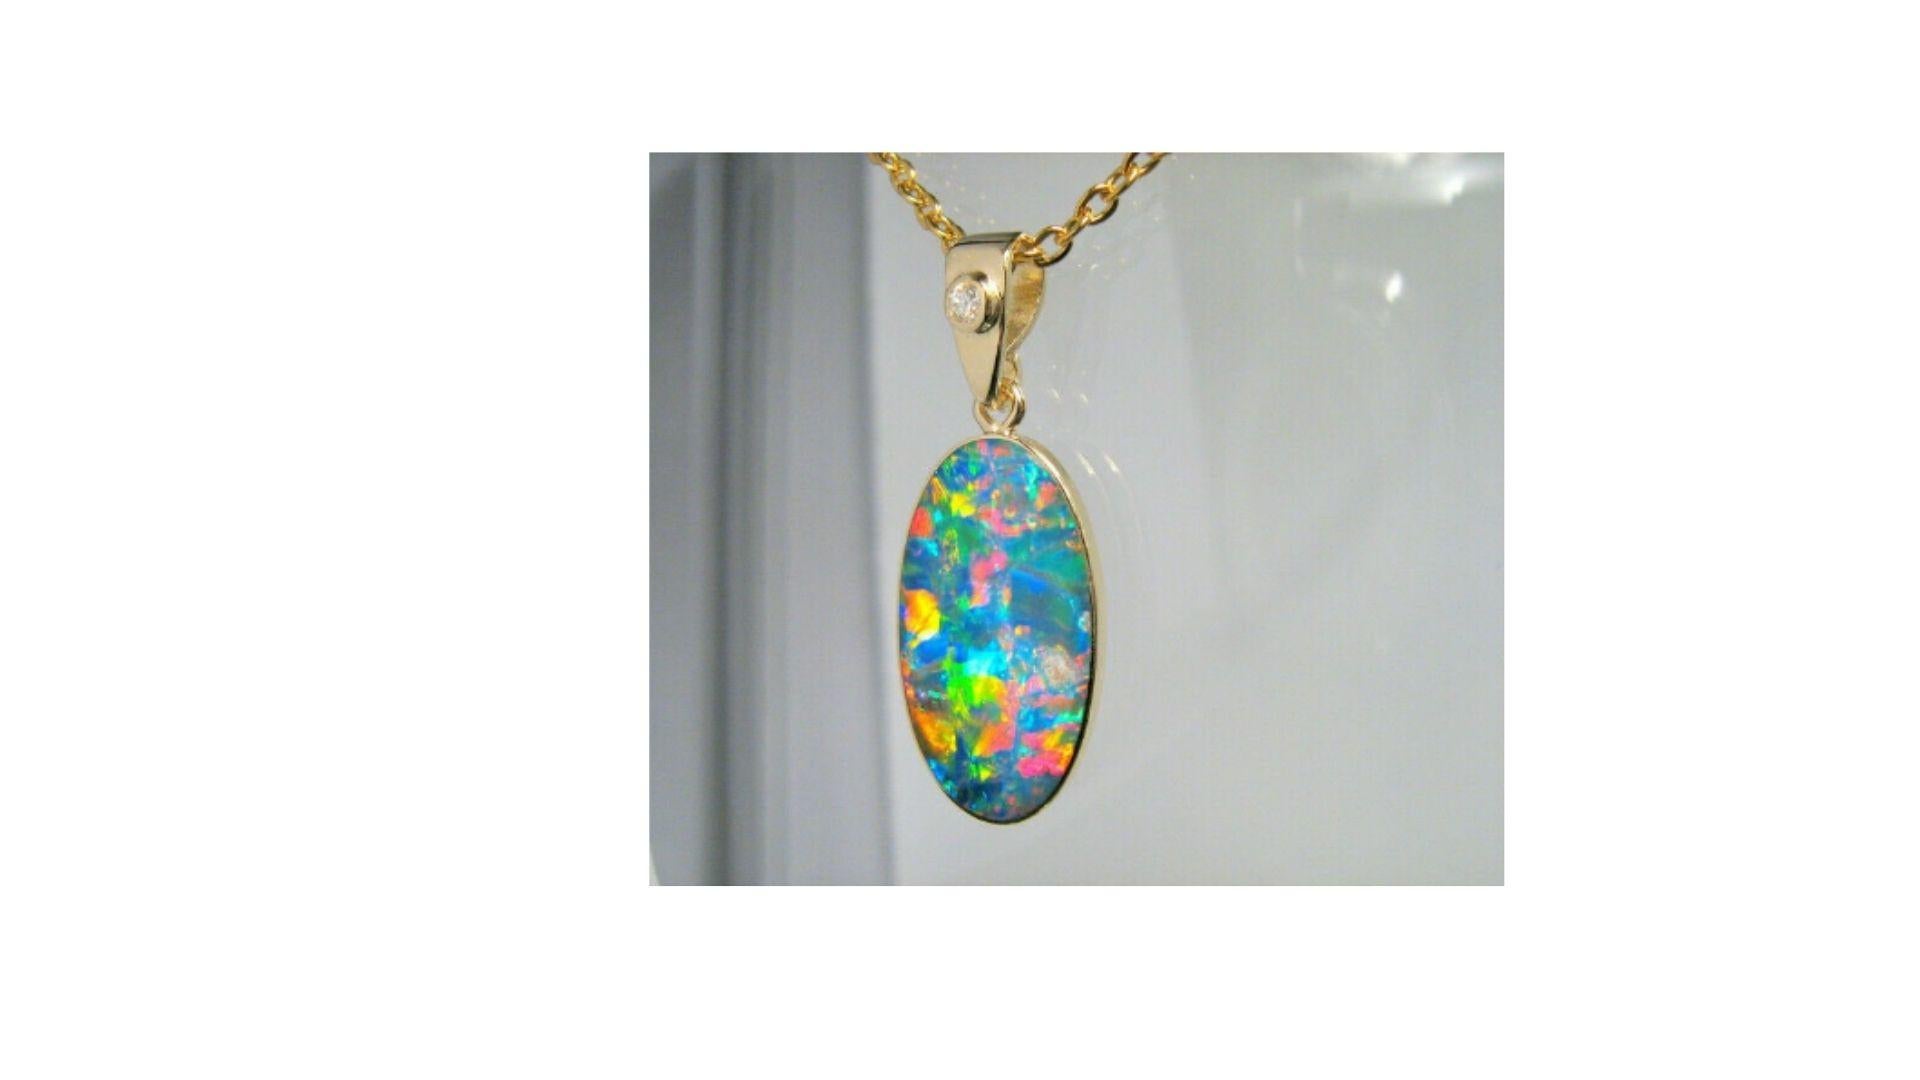 Oval Cut Australian Opal Necklace with Option of Earrings 14k Yellow Gold